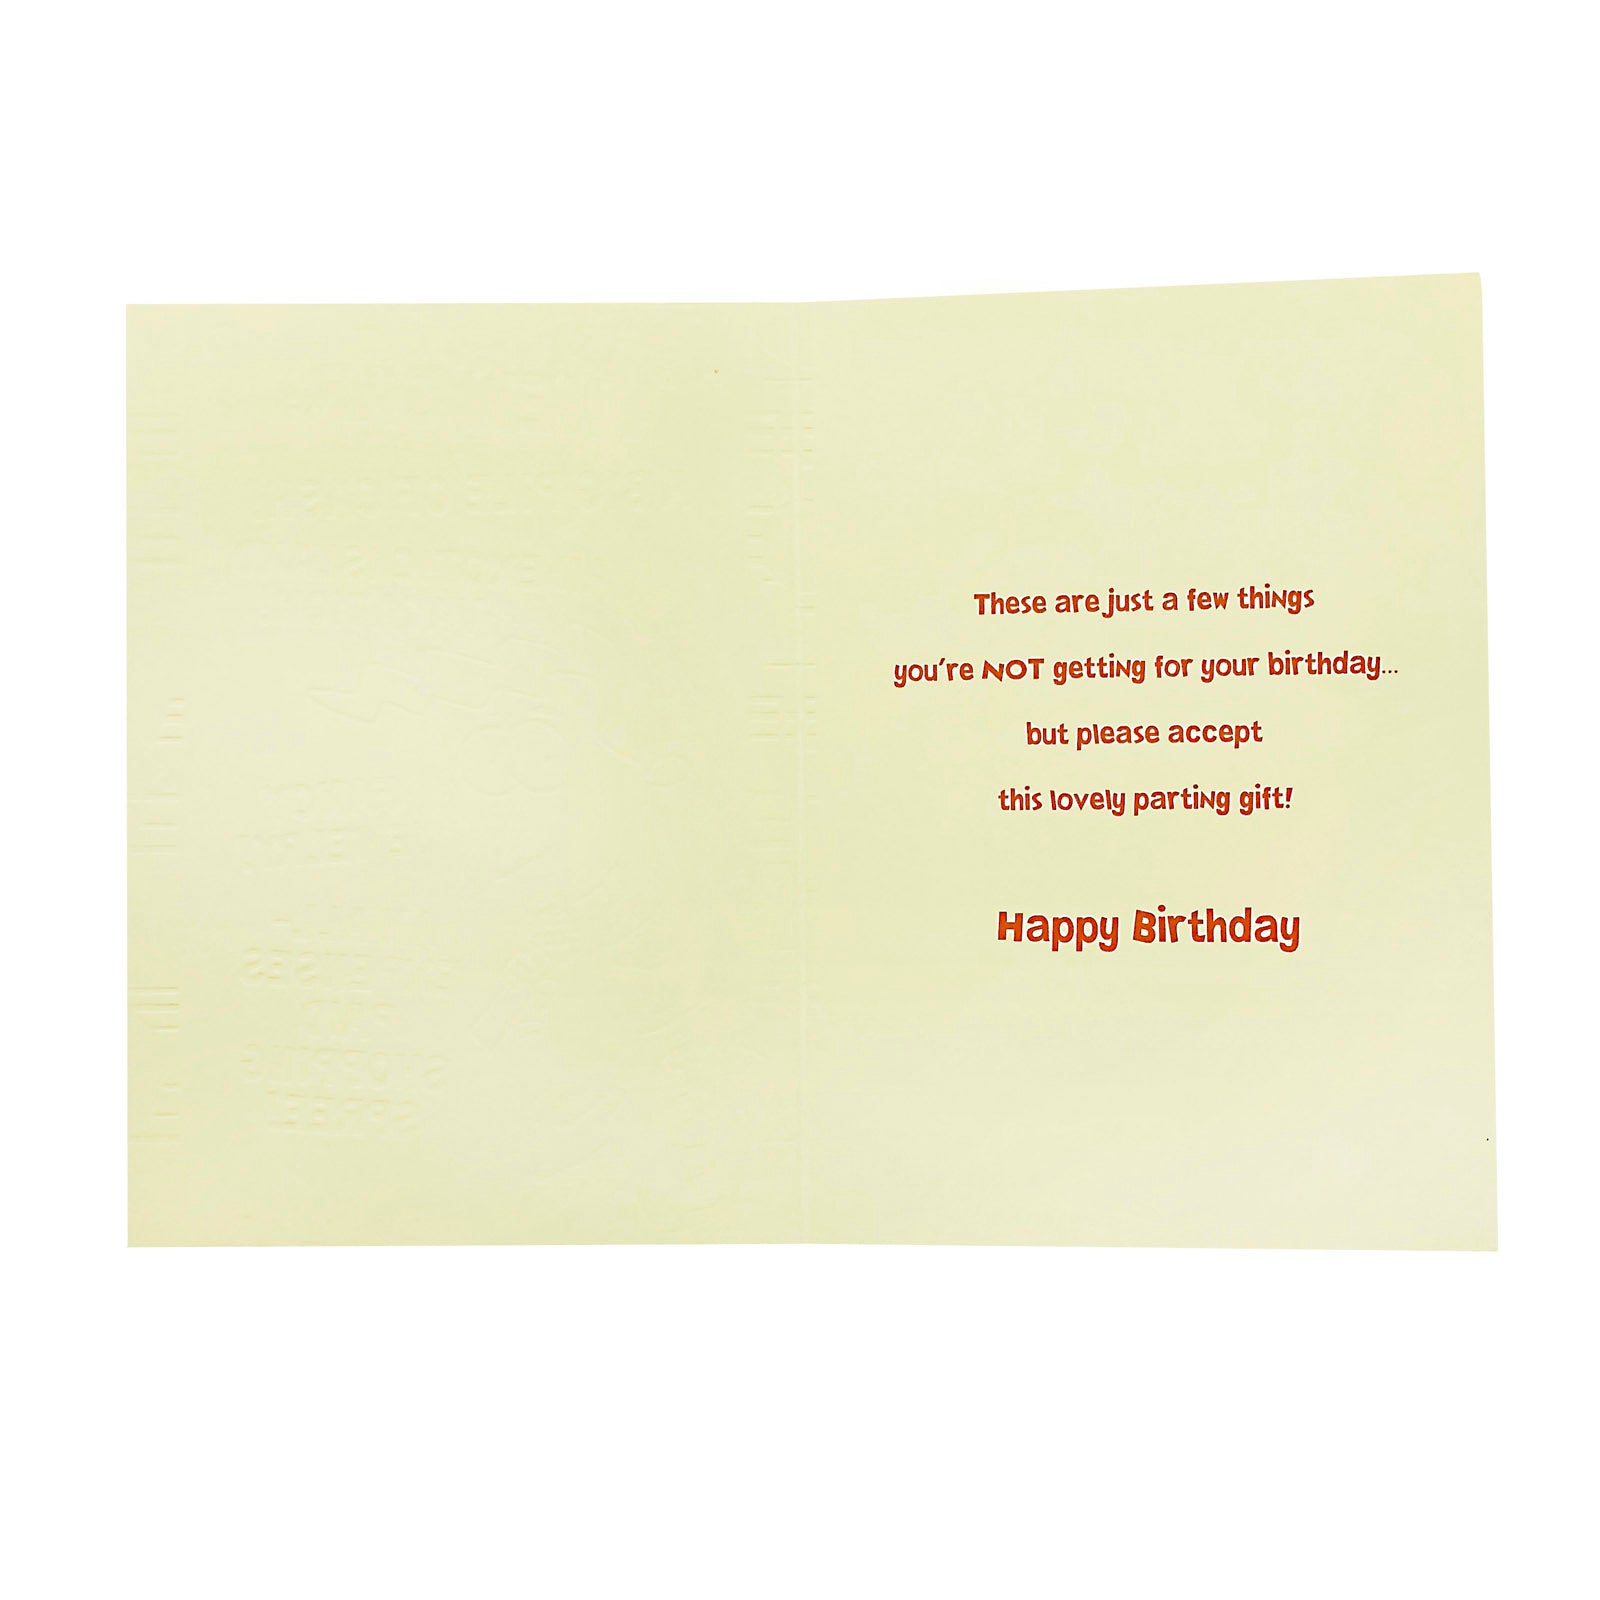 Designer Greetings Birthday Card - A New Car - Game Show Host